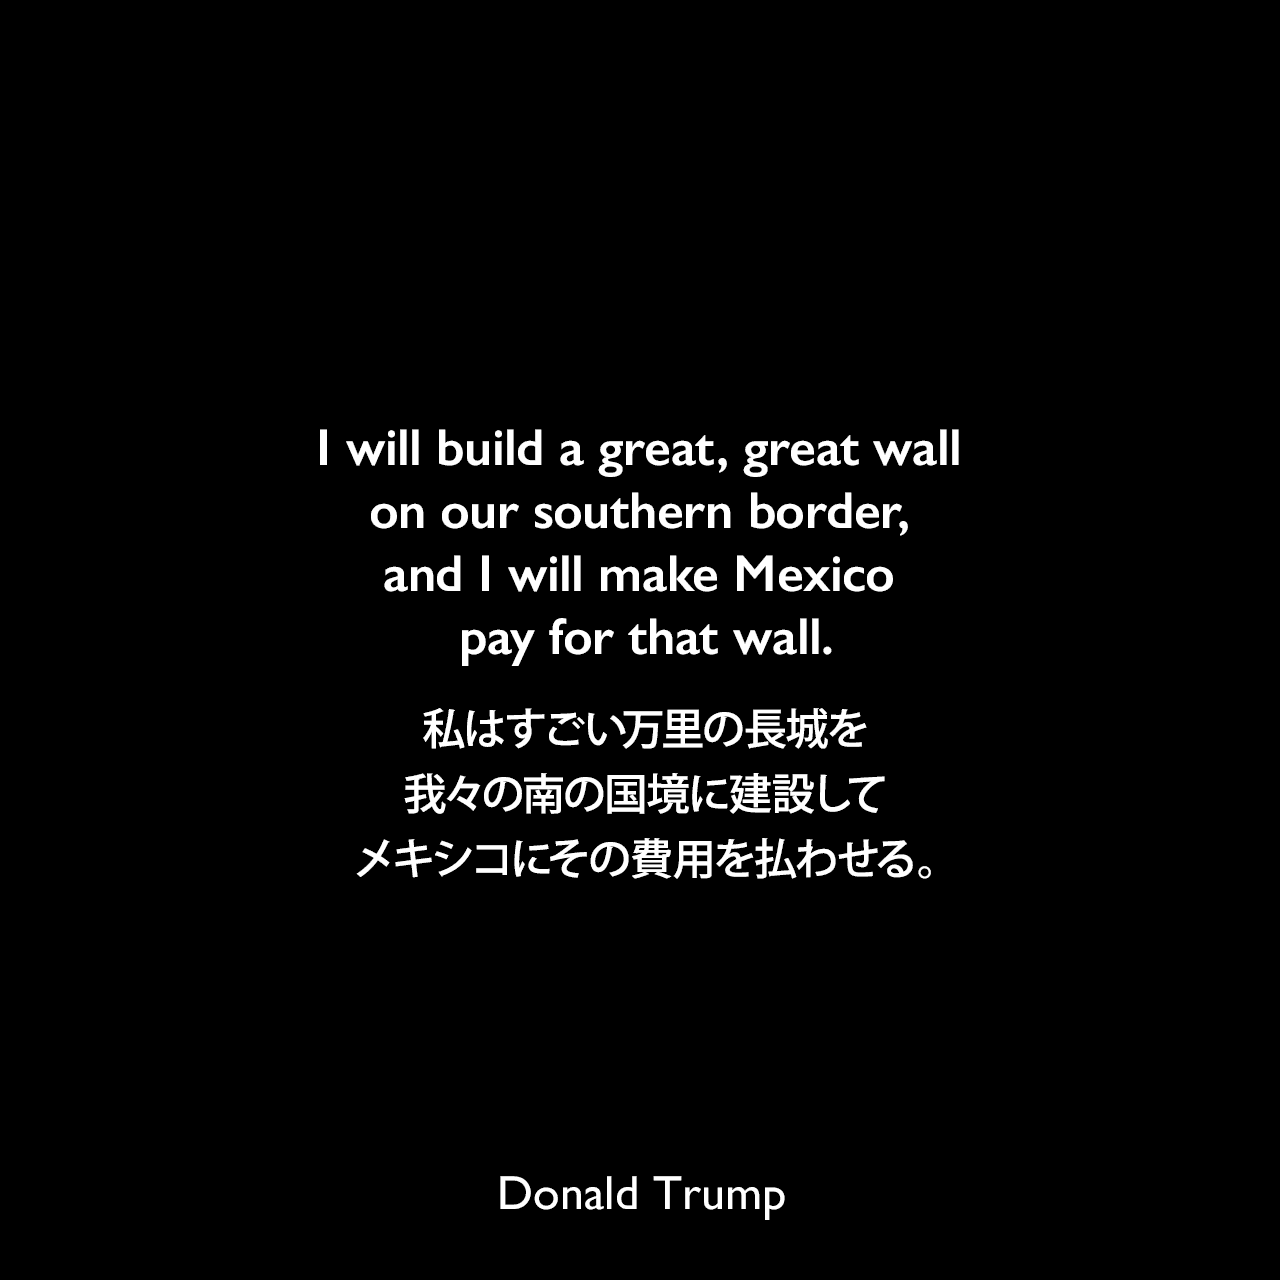 I will build a great, great wall on our southern border, and I will make Mexico pay for that wall.私はすごい万里の長城を我々の南の国境に建設して、メキシコにその費用を払わせる。- 2015年の選挙集会よりDonald Trump